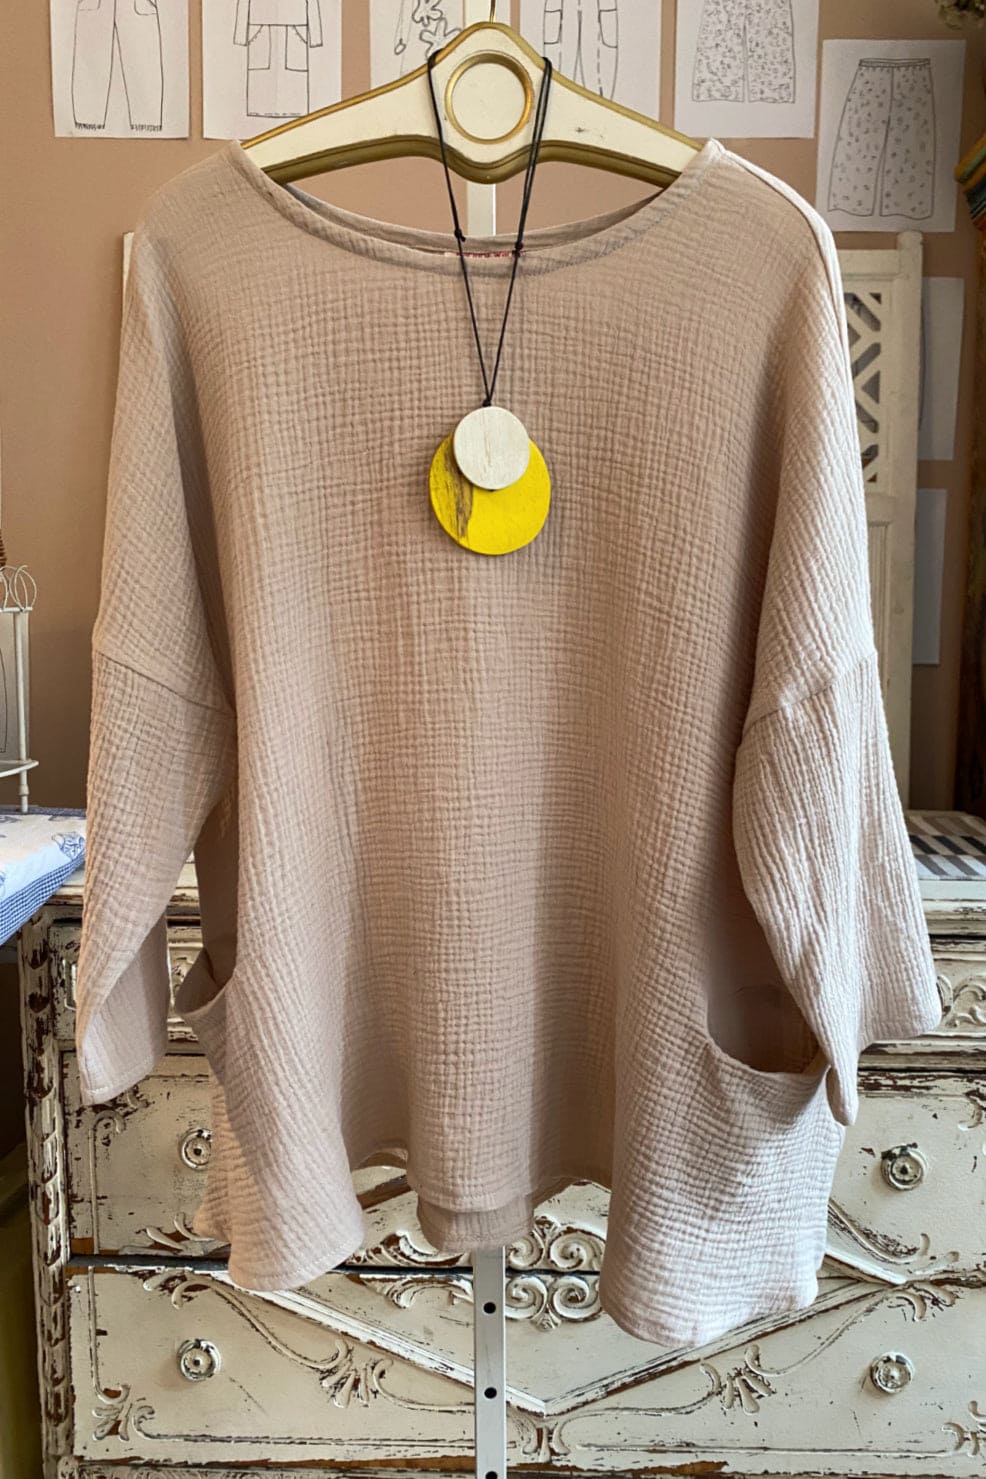 Beige cotton women's top with long sleeves and two front pockets styles with a yellow wooden pendant.